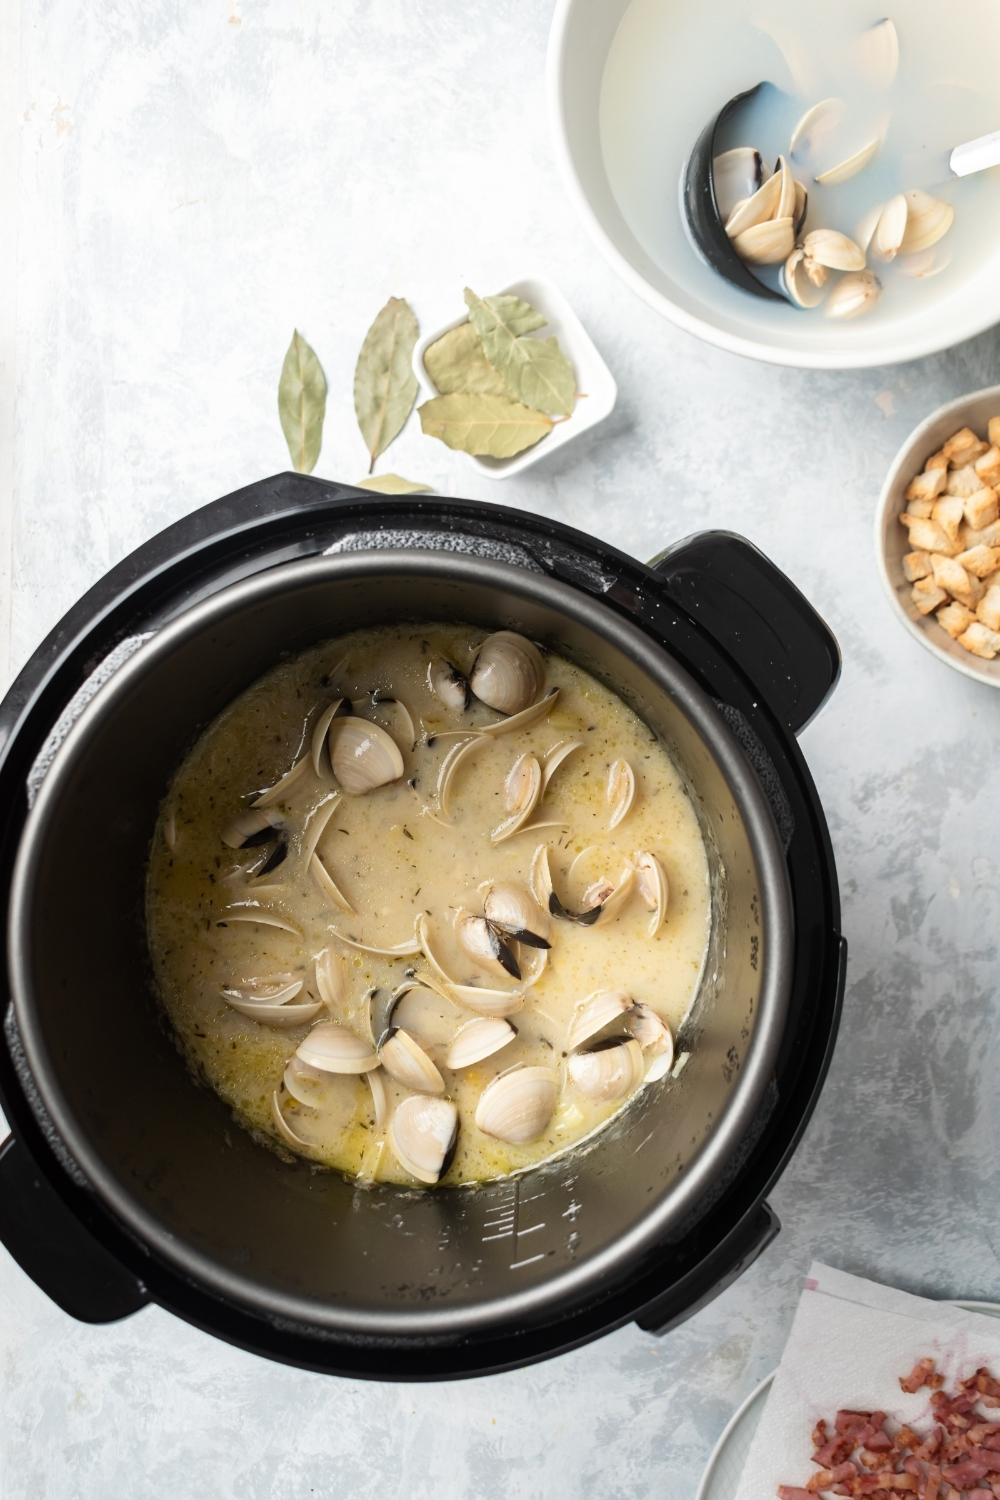 An instant pot filled with clams and other clam chowder ingredients. Behind it on the gray counter is part of a white bowl filled with clams in water.